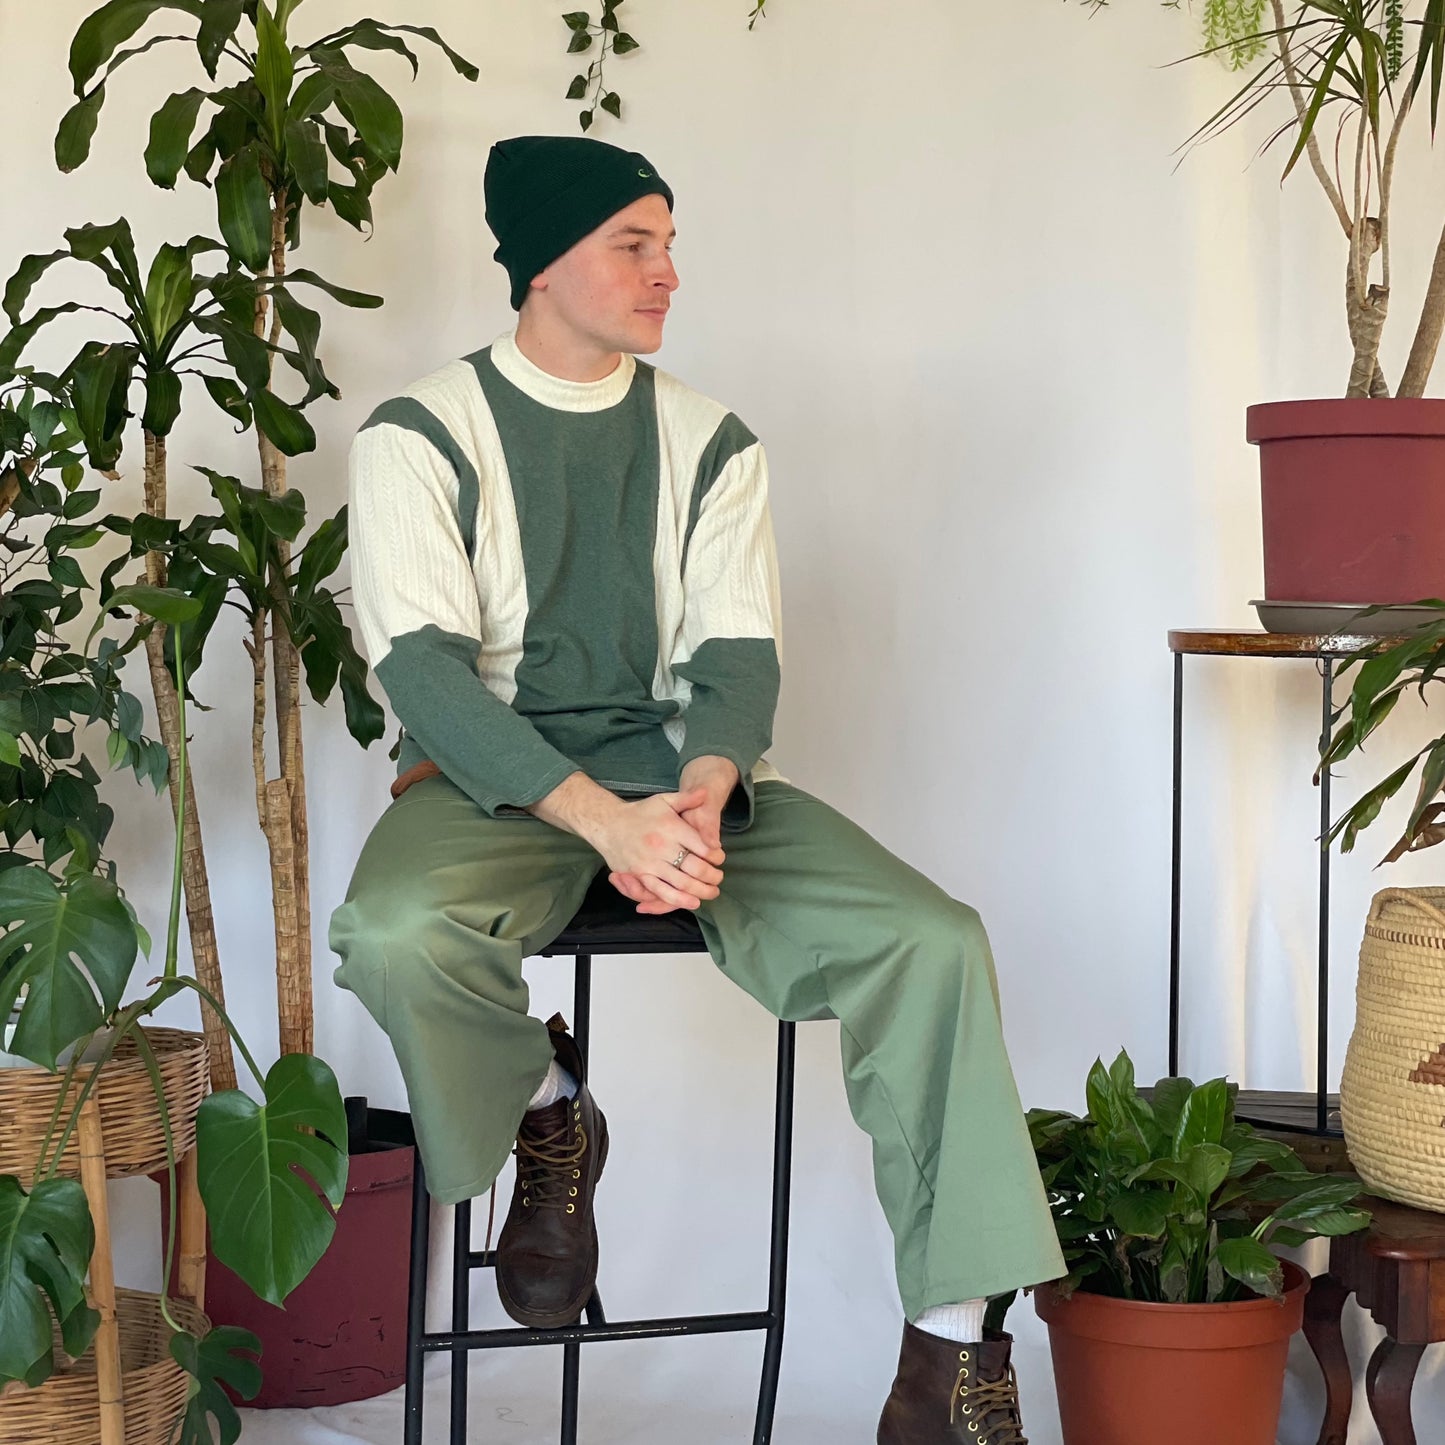 Model wears green pants with a striped jersey and green beanie. Model sits against a white backdrop with plants and hanging foliage.